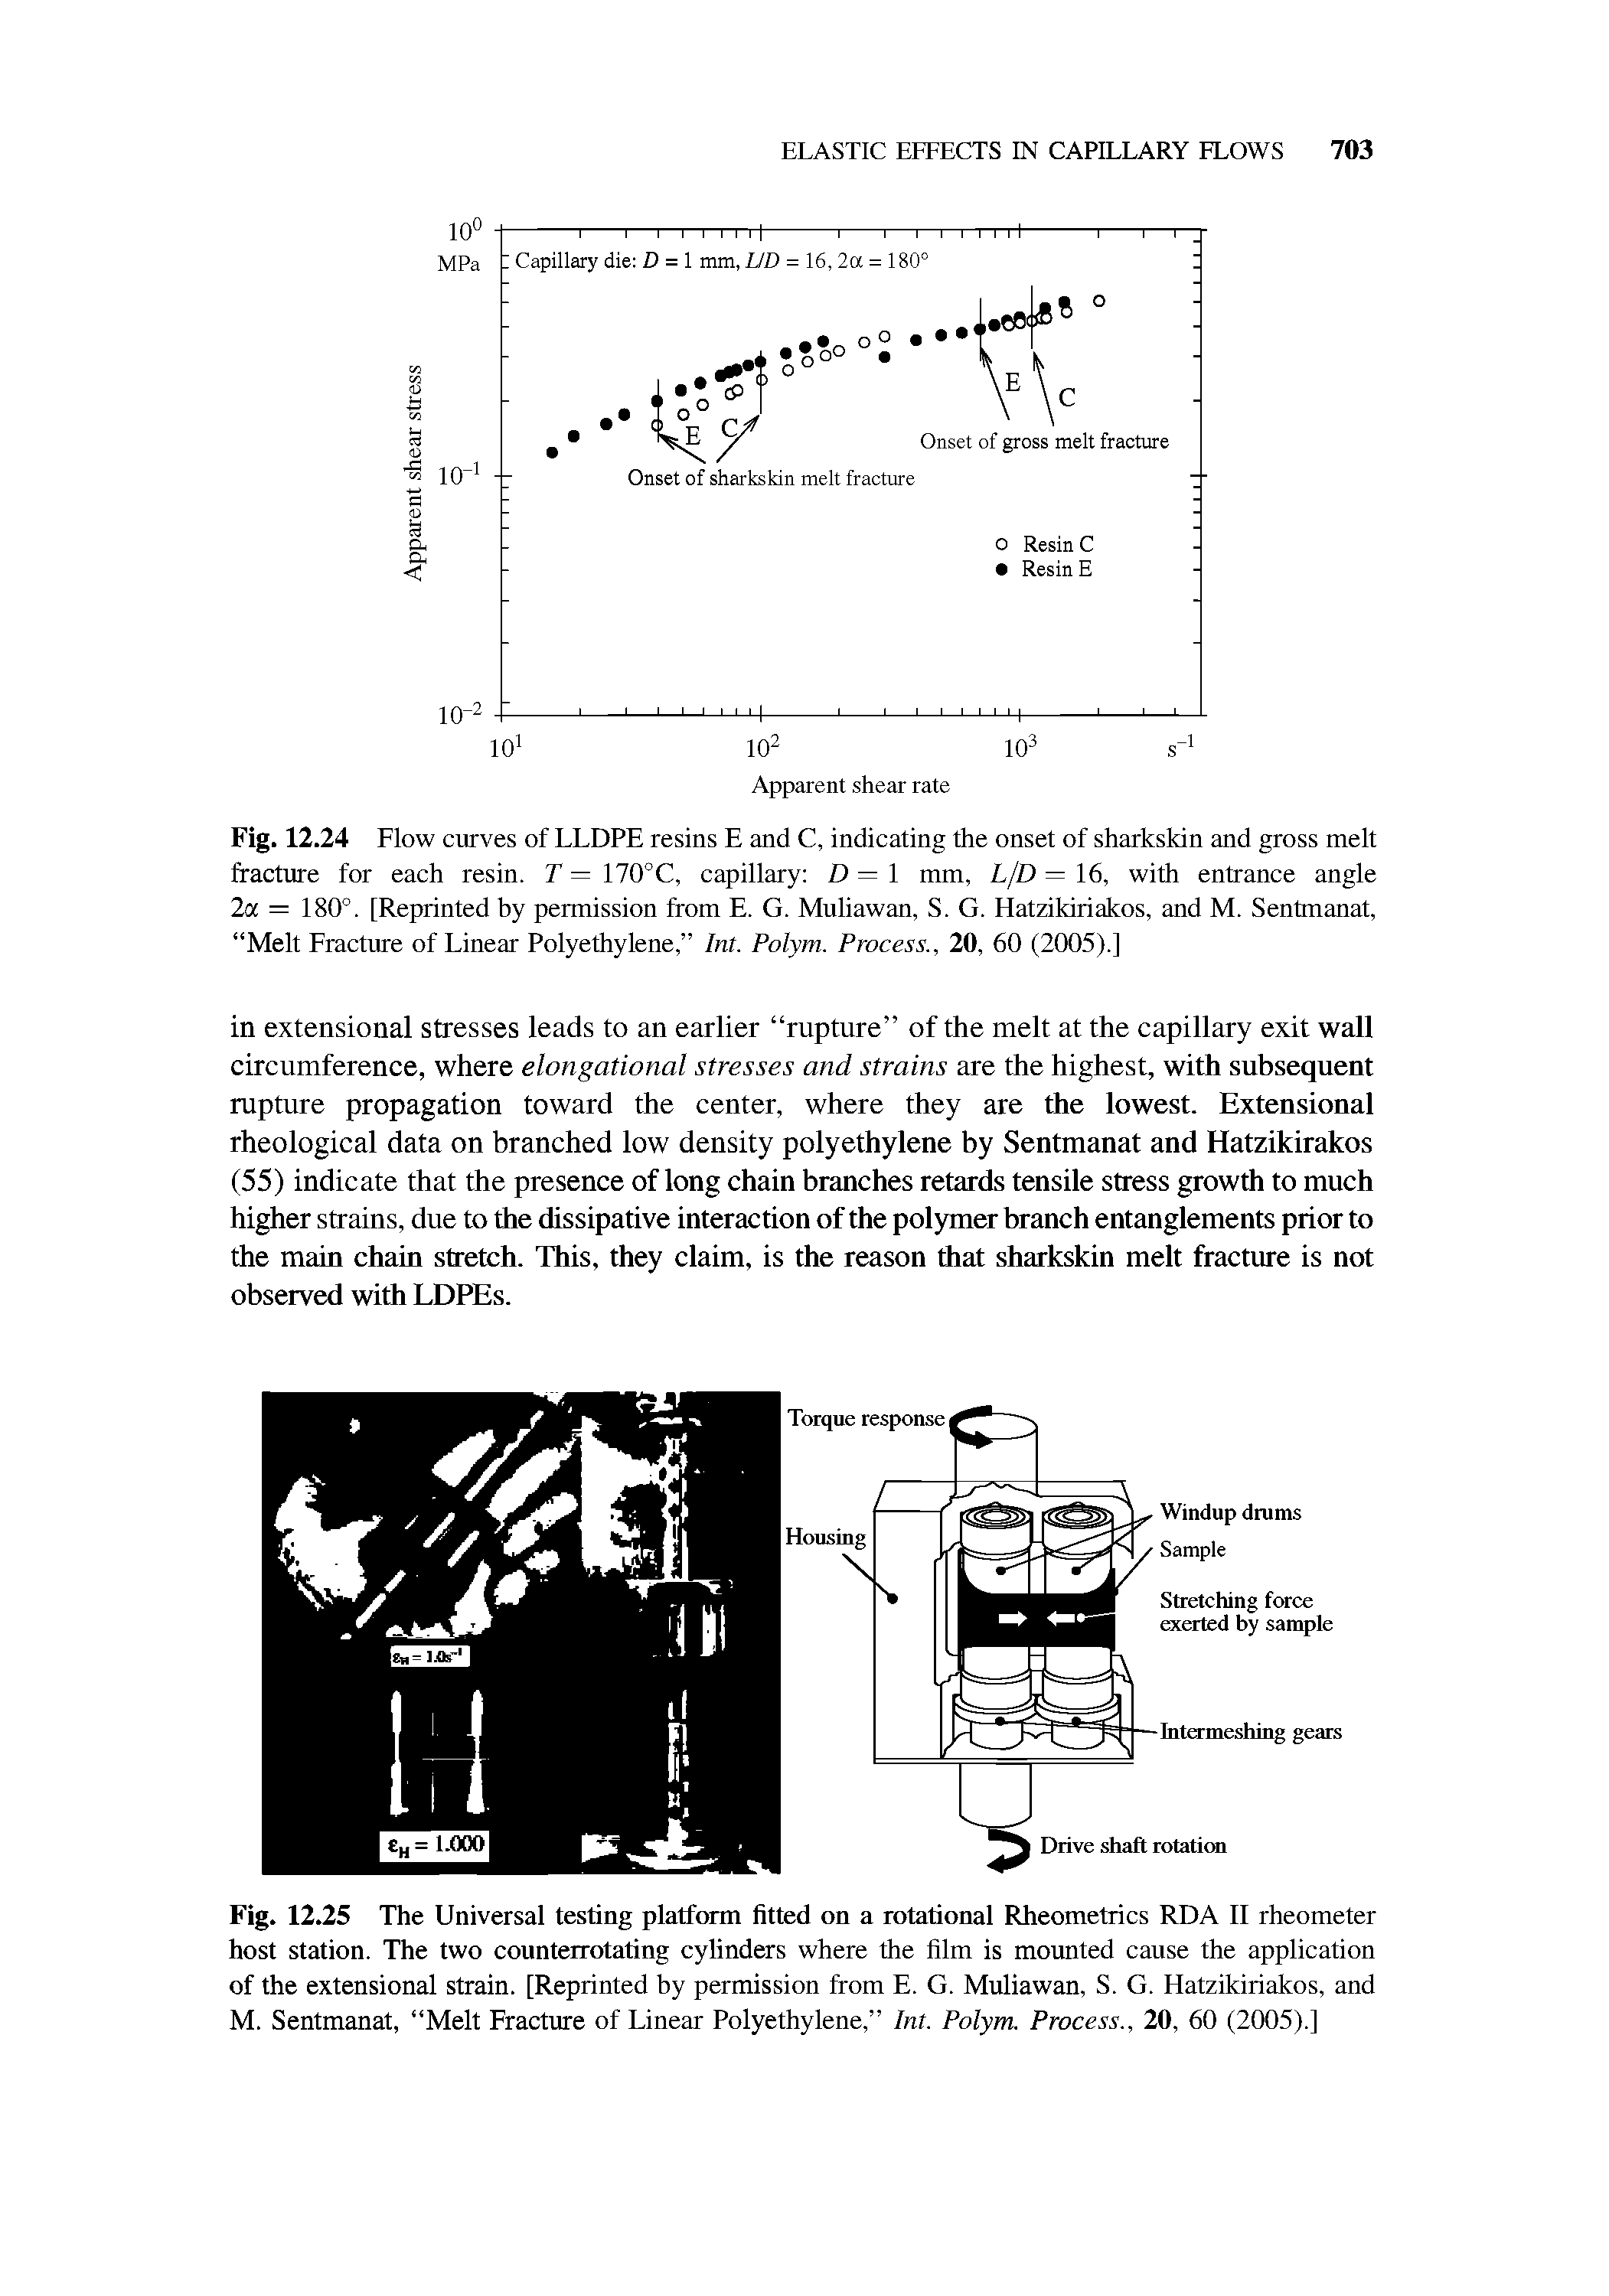 Fig. 12.24 Flow curves of LLDPE resins E and C, indicating the onset of sharkskin and gross melt fracture for each resin. T — 170°C, capillary D = 1 mm, L/D = 16, with entrance angle 2a = 180°. [Reprinted by permission from E. G. Muliawan, S. G. Hatzikiriakos, and M. Sentmanat, Melt Fracture of Linear Polyethylene, hit. Polym. Process., 20, 60 (2005).]...